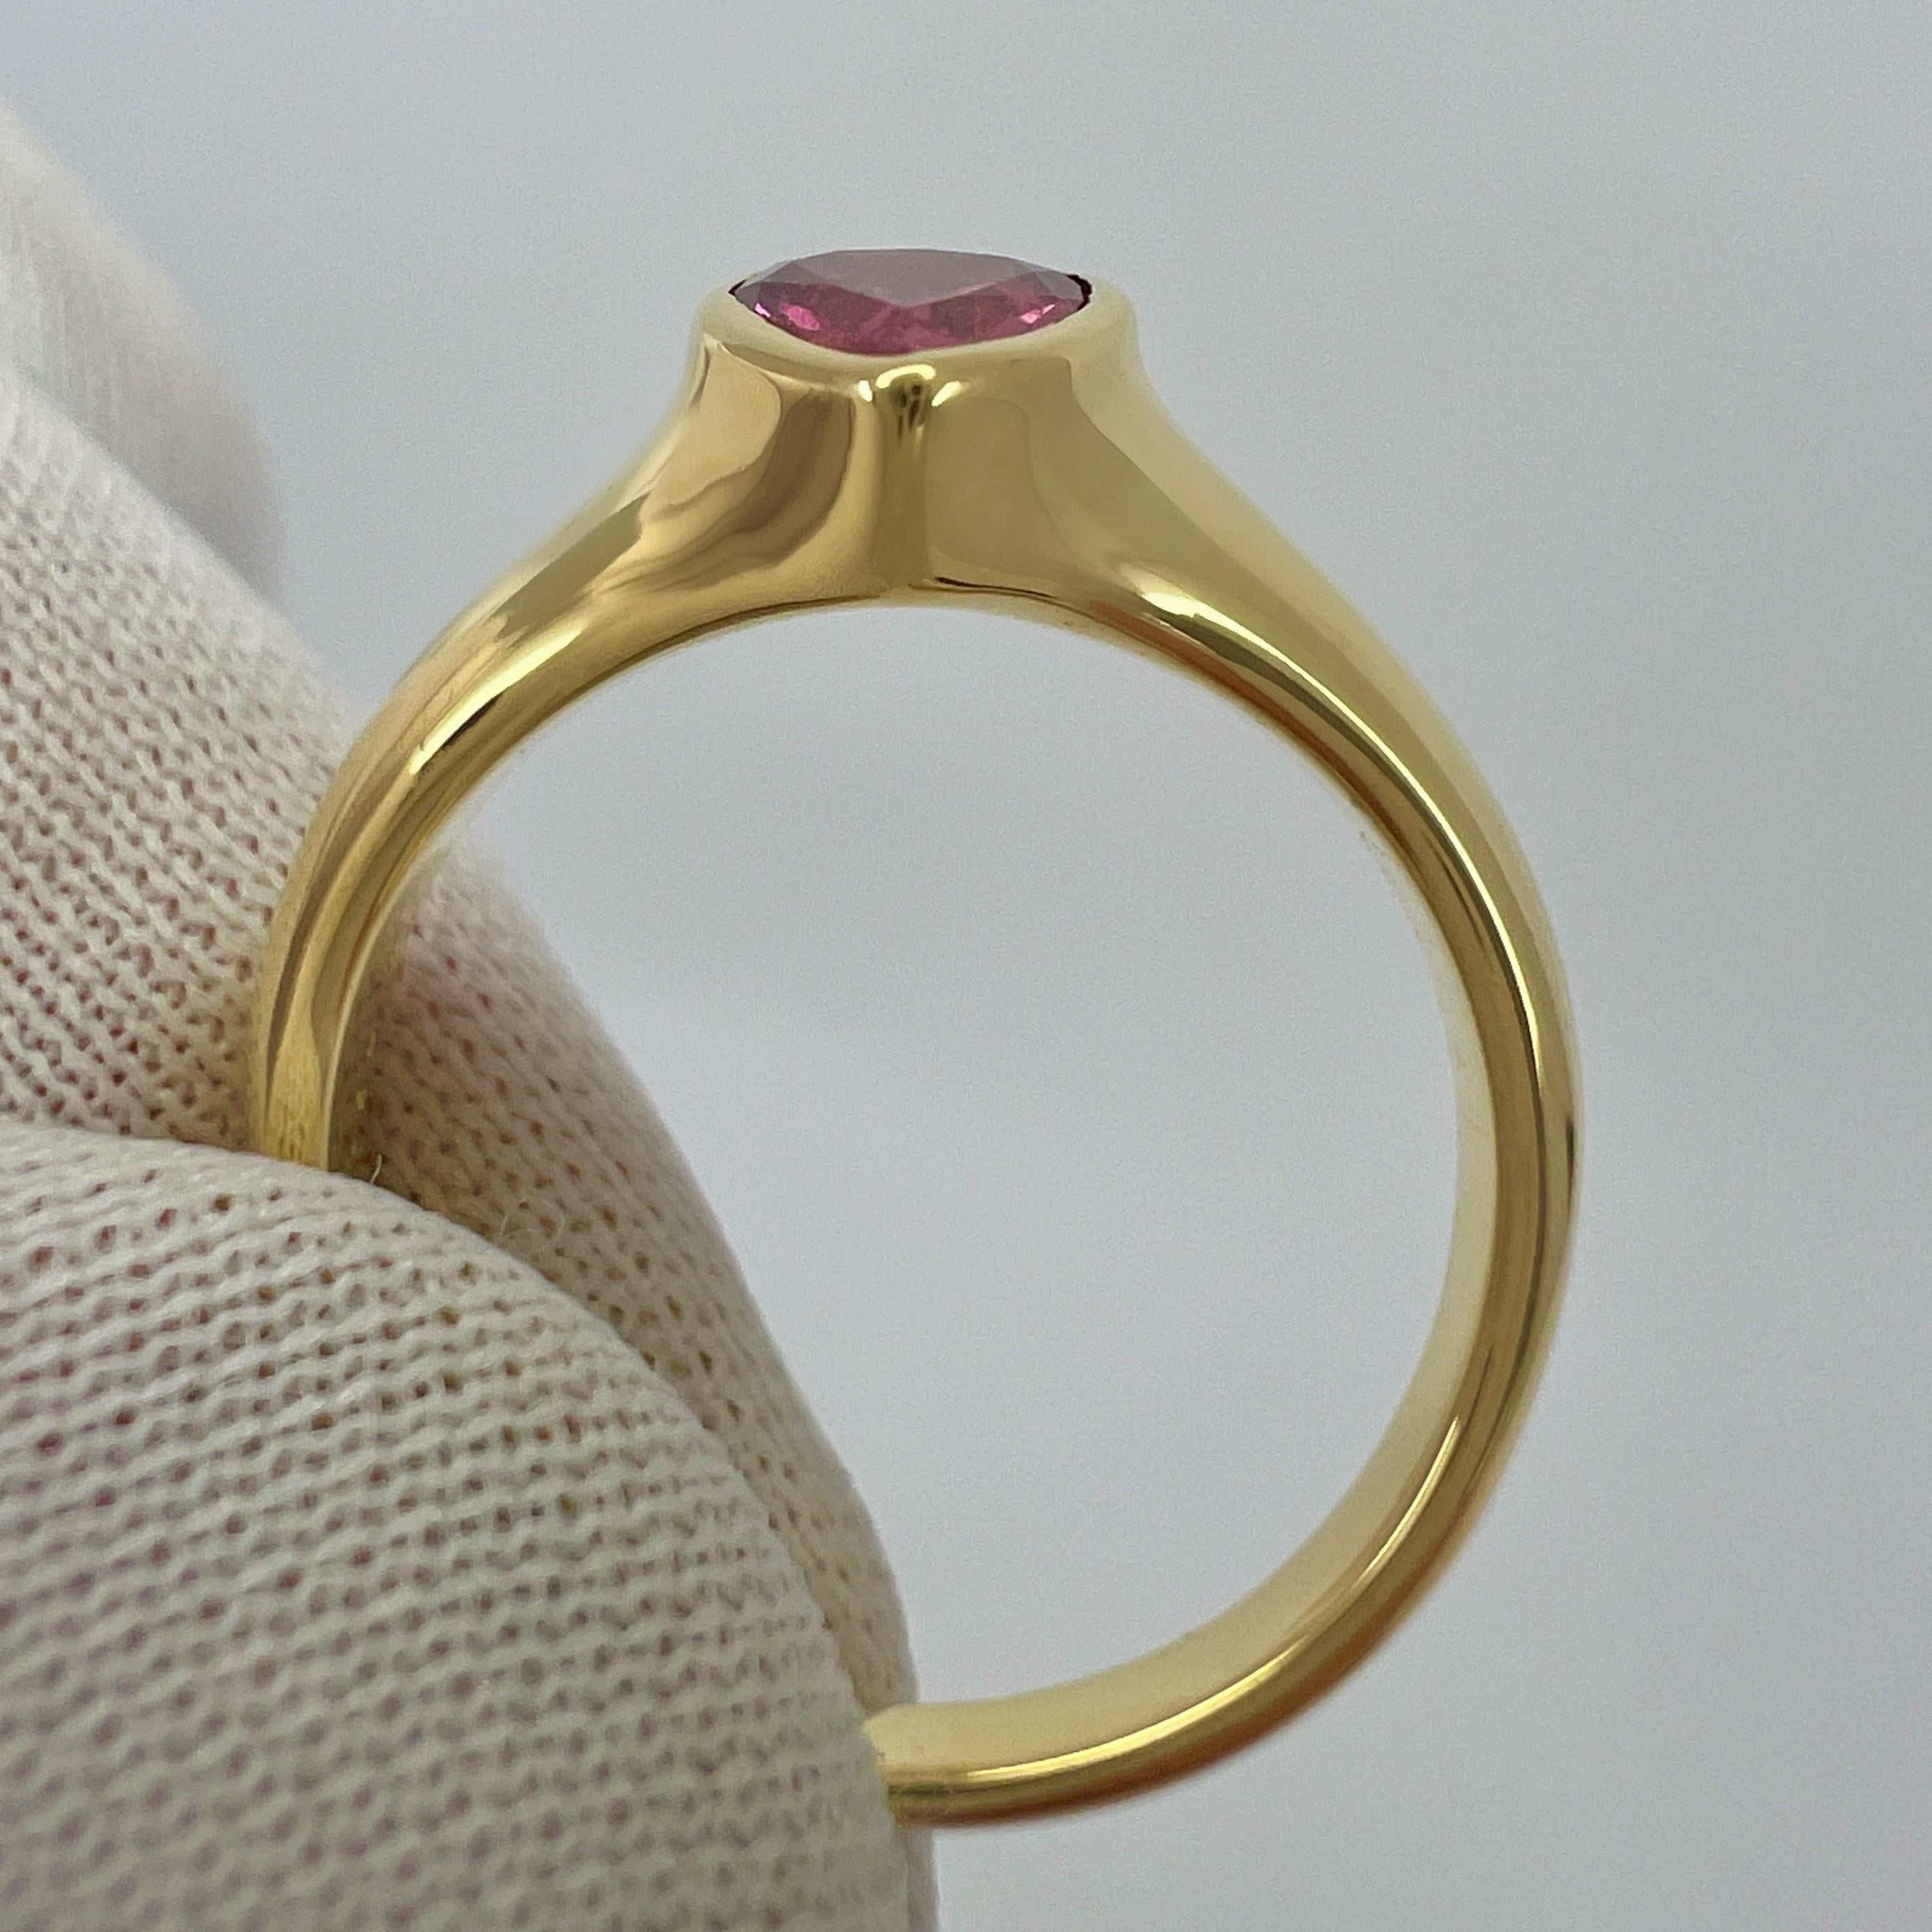 Rare Vintage Van Cleef & Arpels Pink Tourmaline Pear Cut 18k Yellow Gold Ring For Sale 6